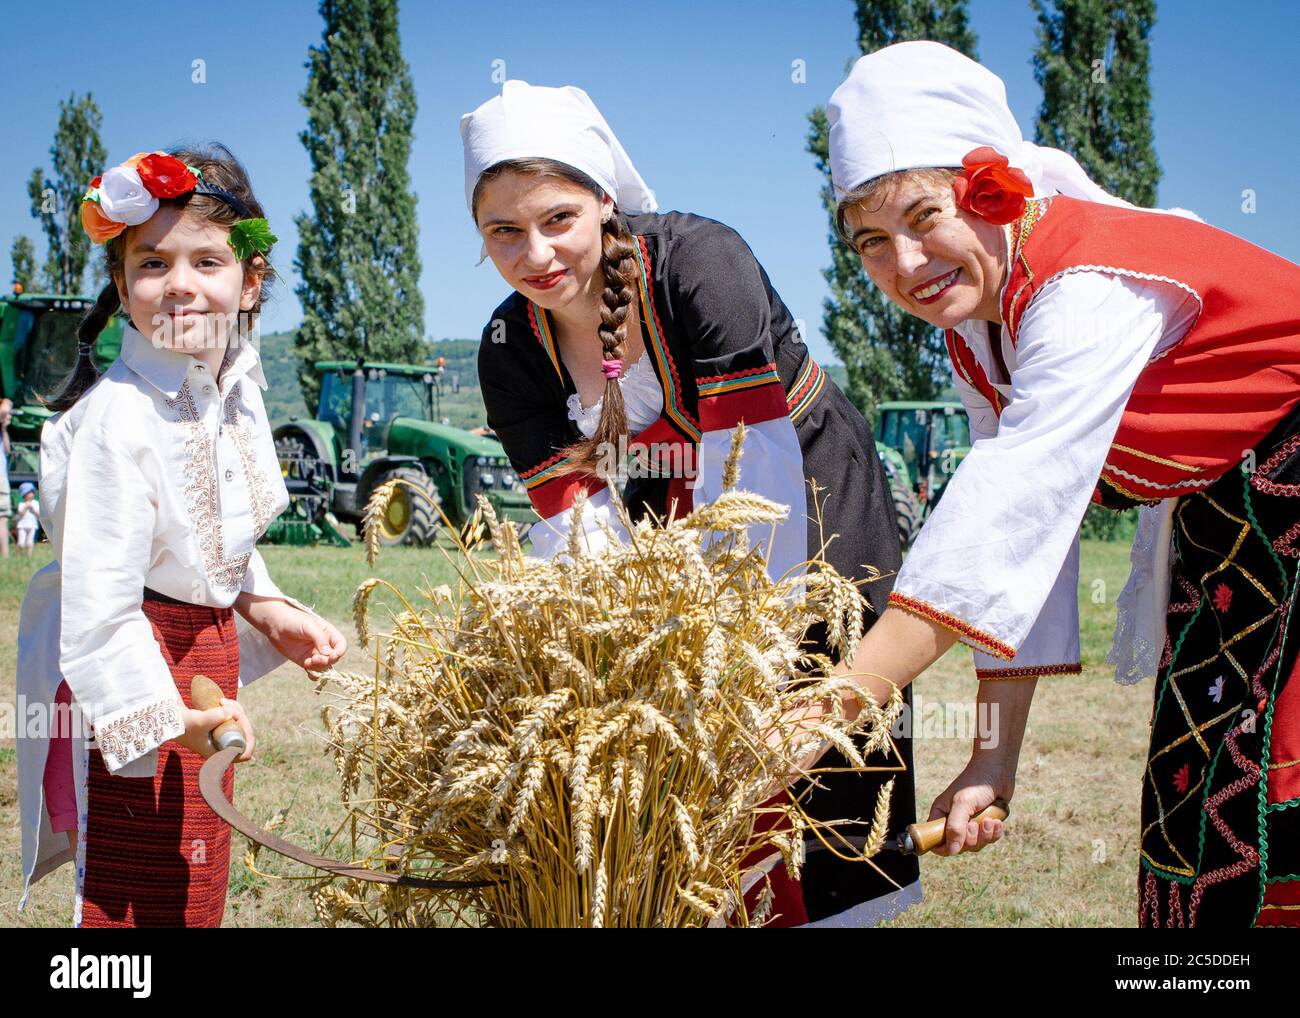 3 Bulgarian ladies make a wheat sheaf and celebrate traditional custom of wheat harvest in countryside village. Stock Photo